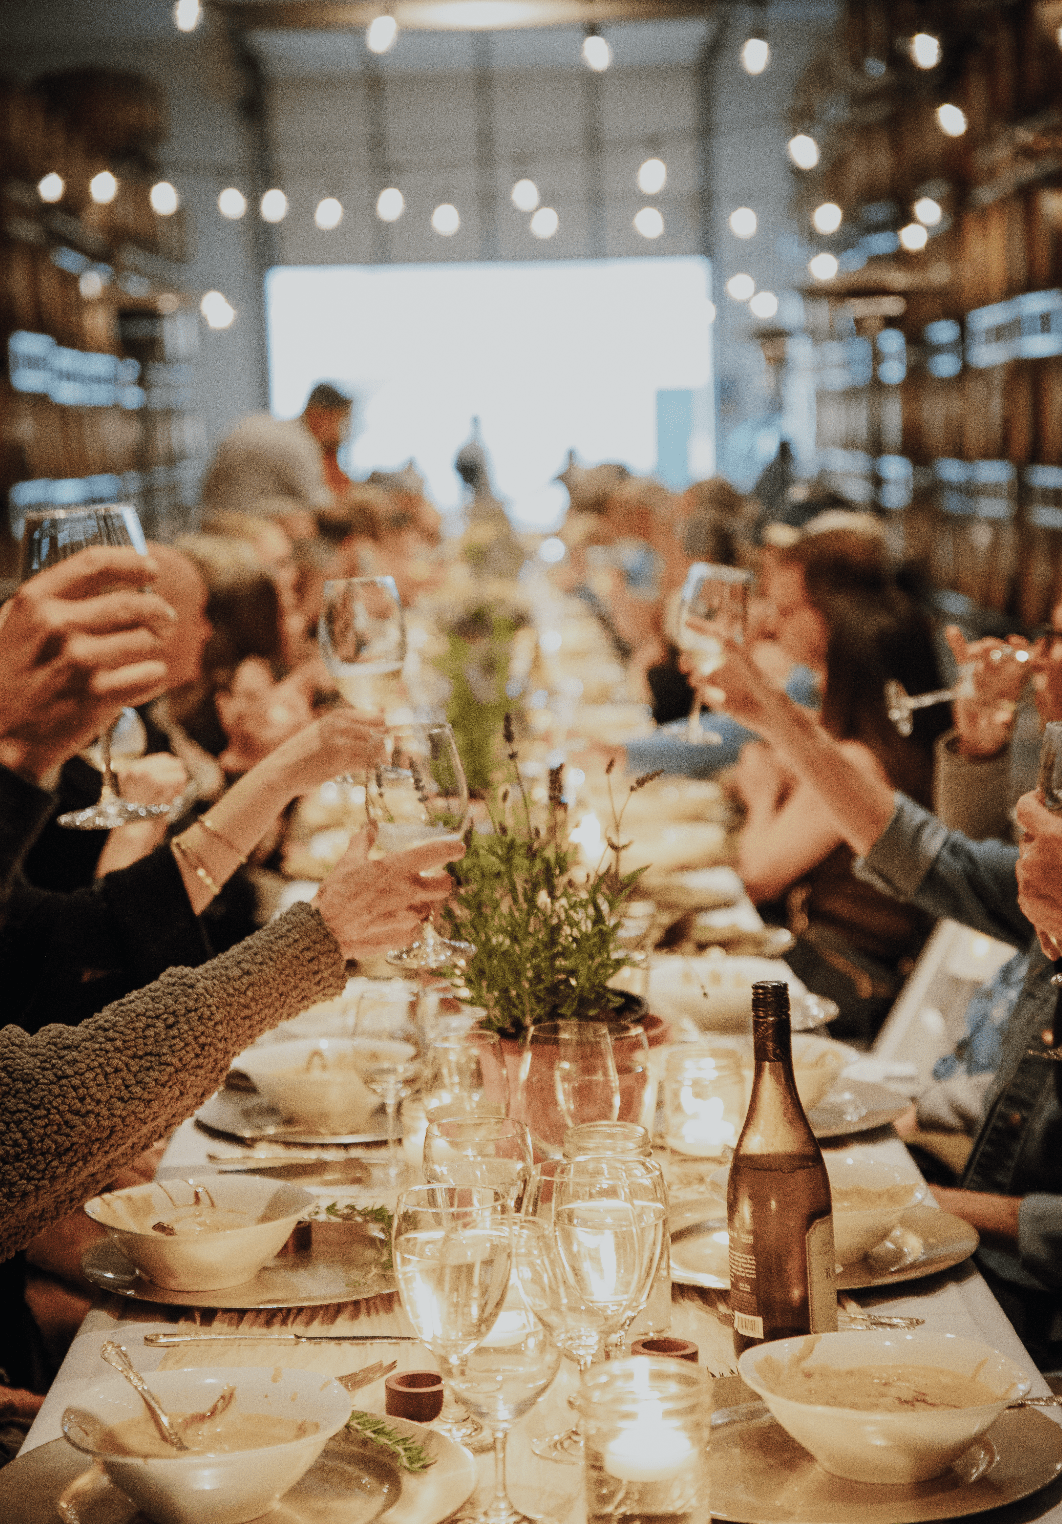 Guests at a long table at an Oregon Winery toasting and clinking glasses of wine.